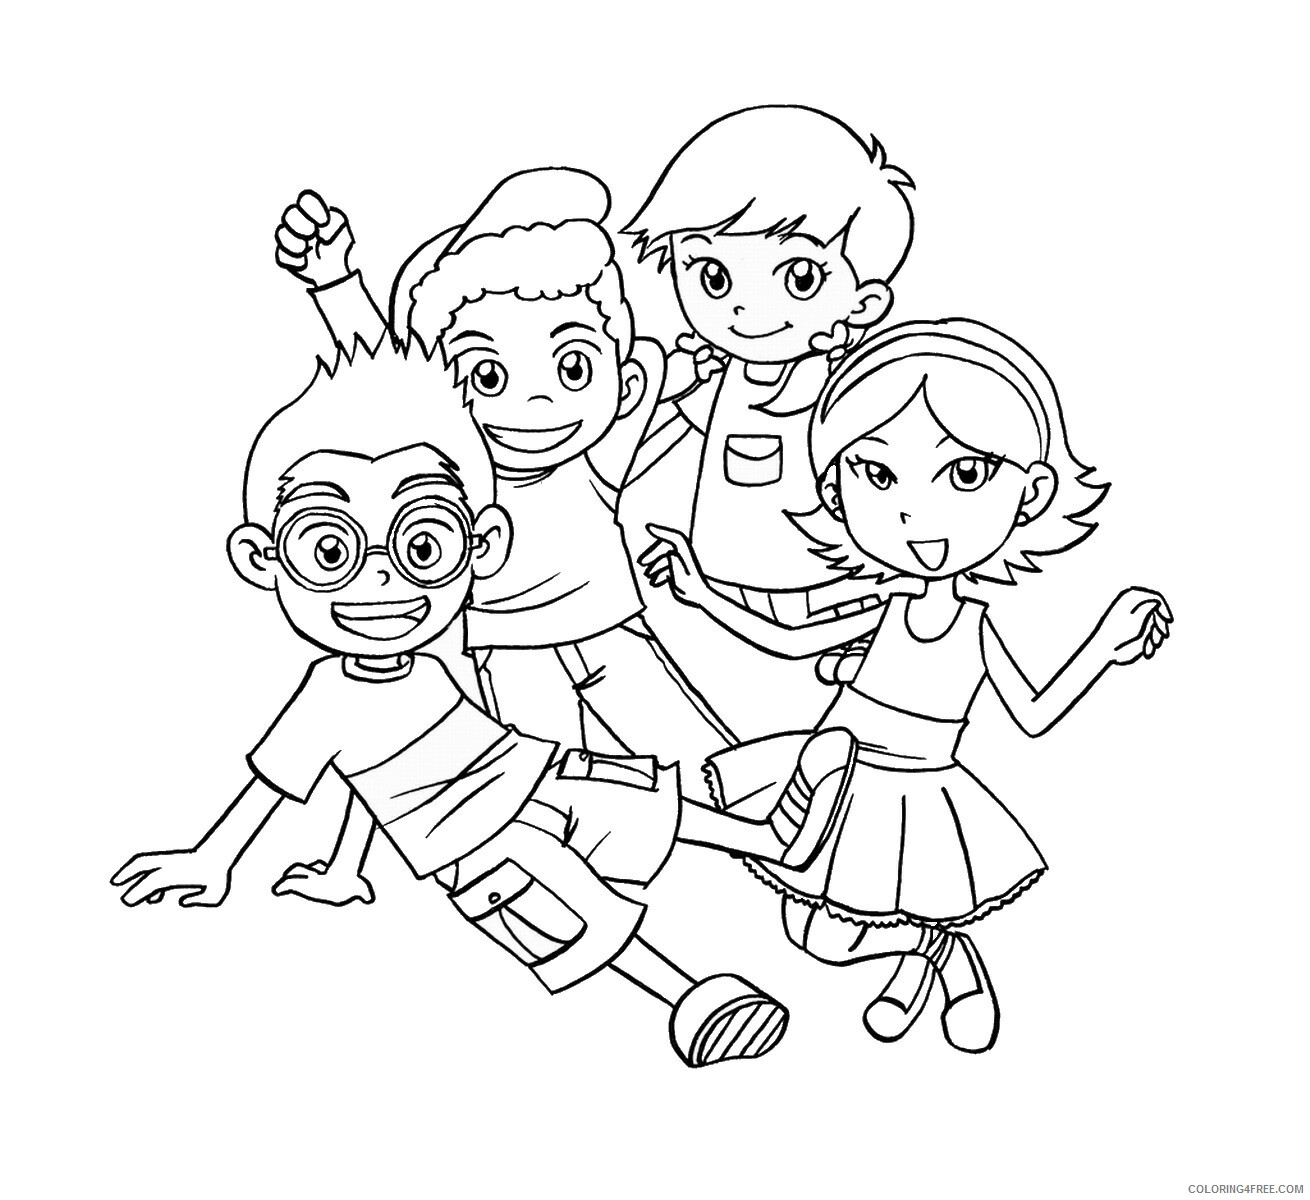 Little Einsteins Coloring Pages TV Film little_einsteins_31 Printable 2020 04495 Coloring4free